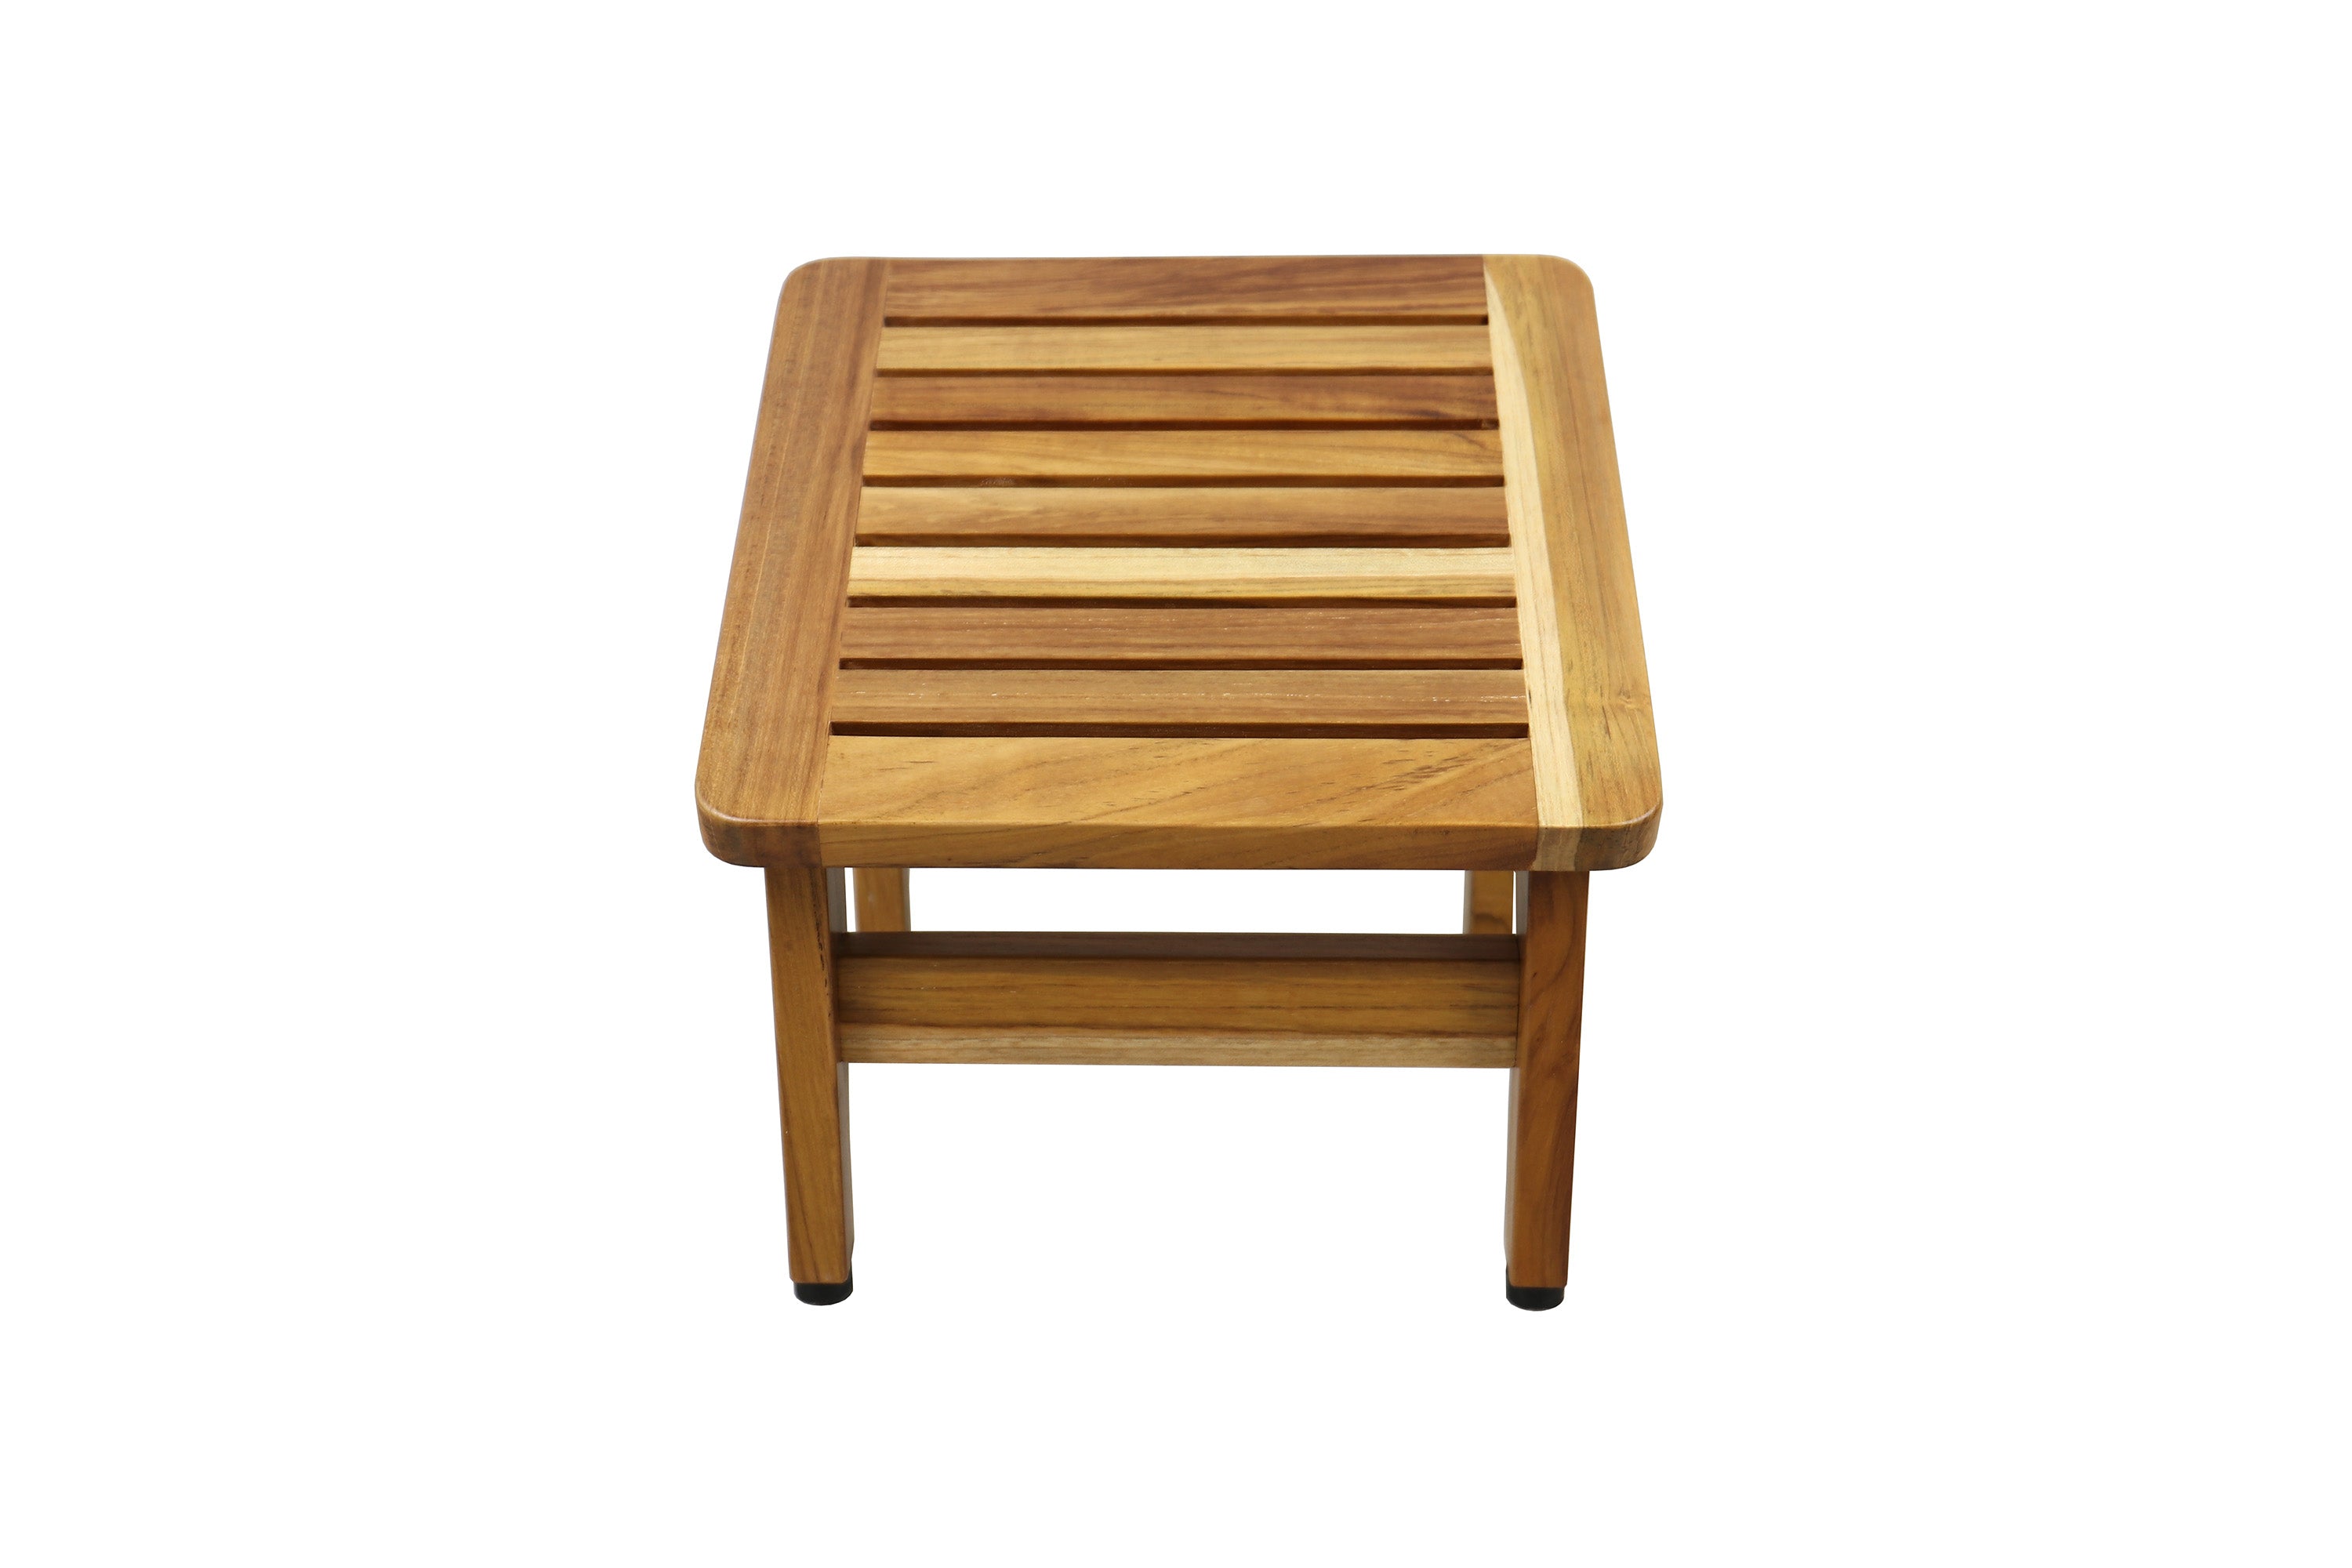 Small Footstools - Foter in 2023  Small footstool, Staining wood, Footstool